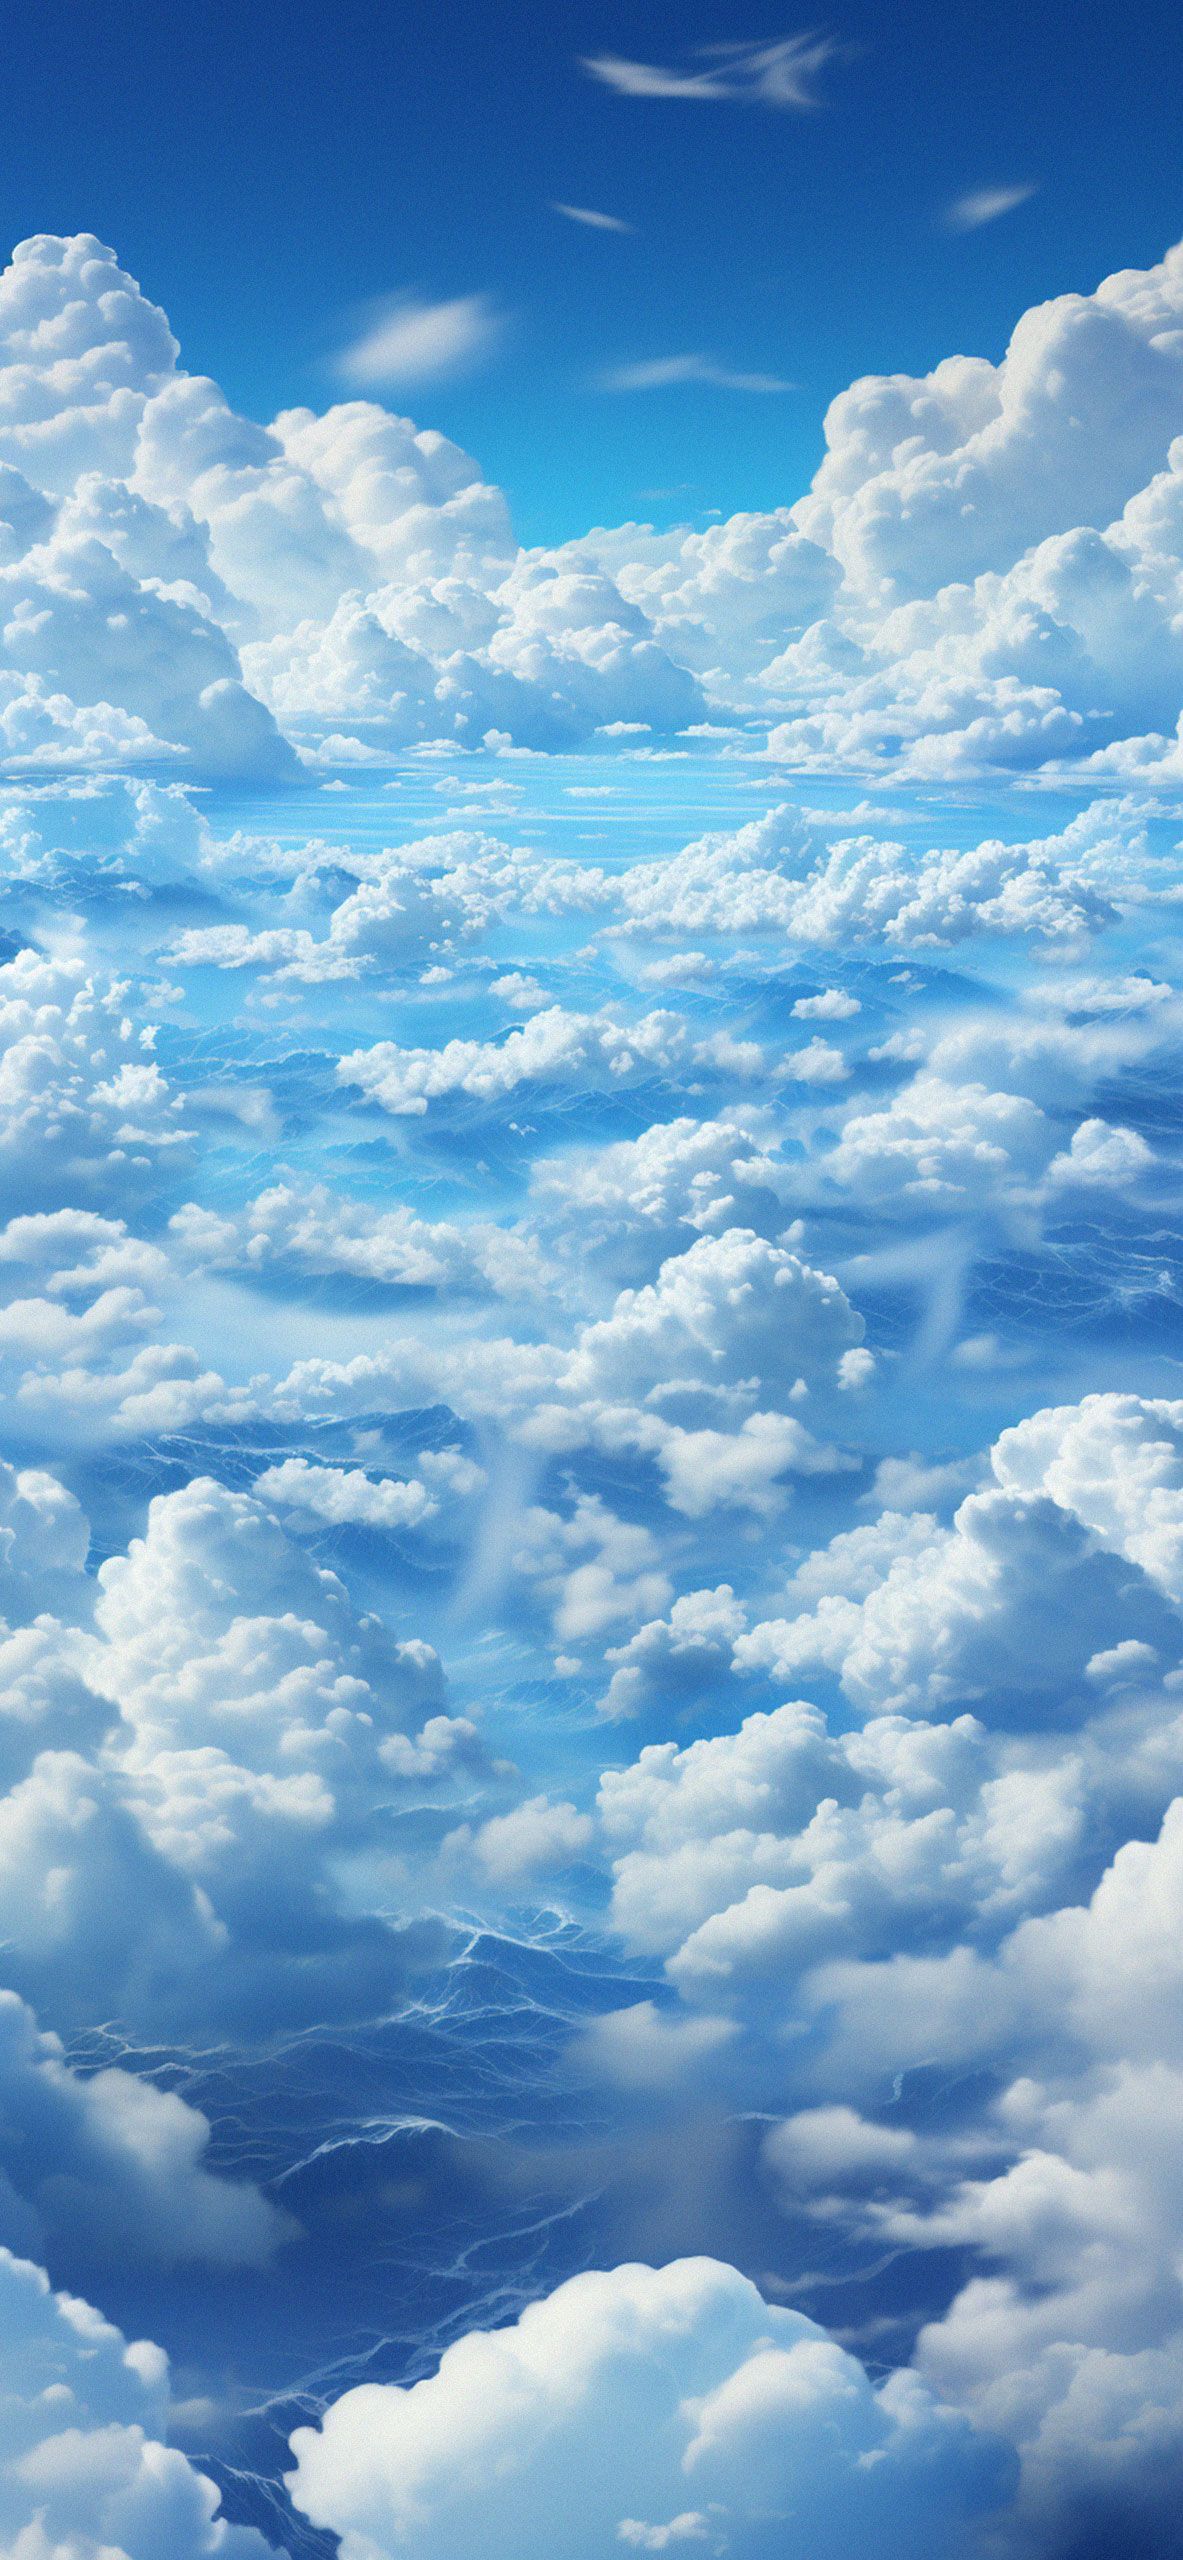 Aerial view of white clouds in a blue sky - Cloud, calming